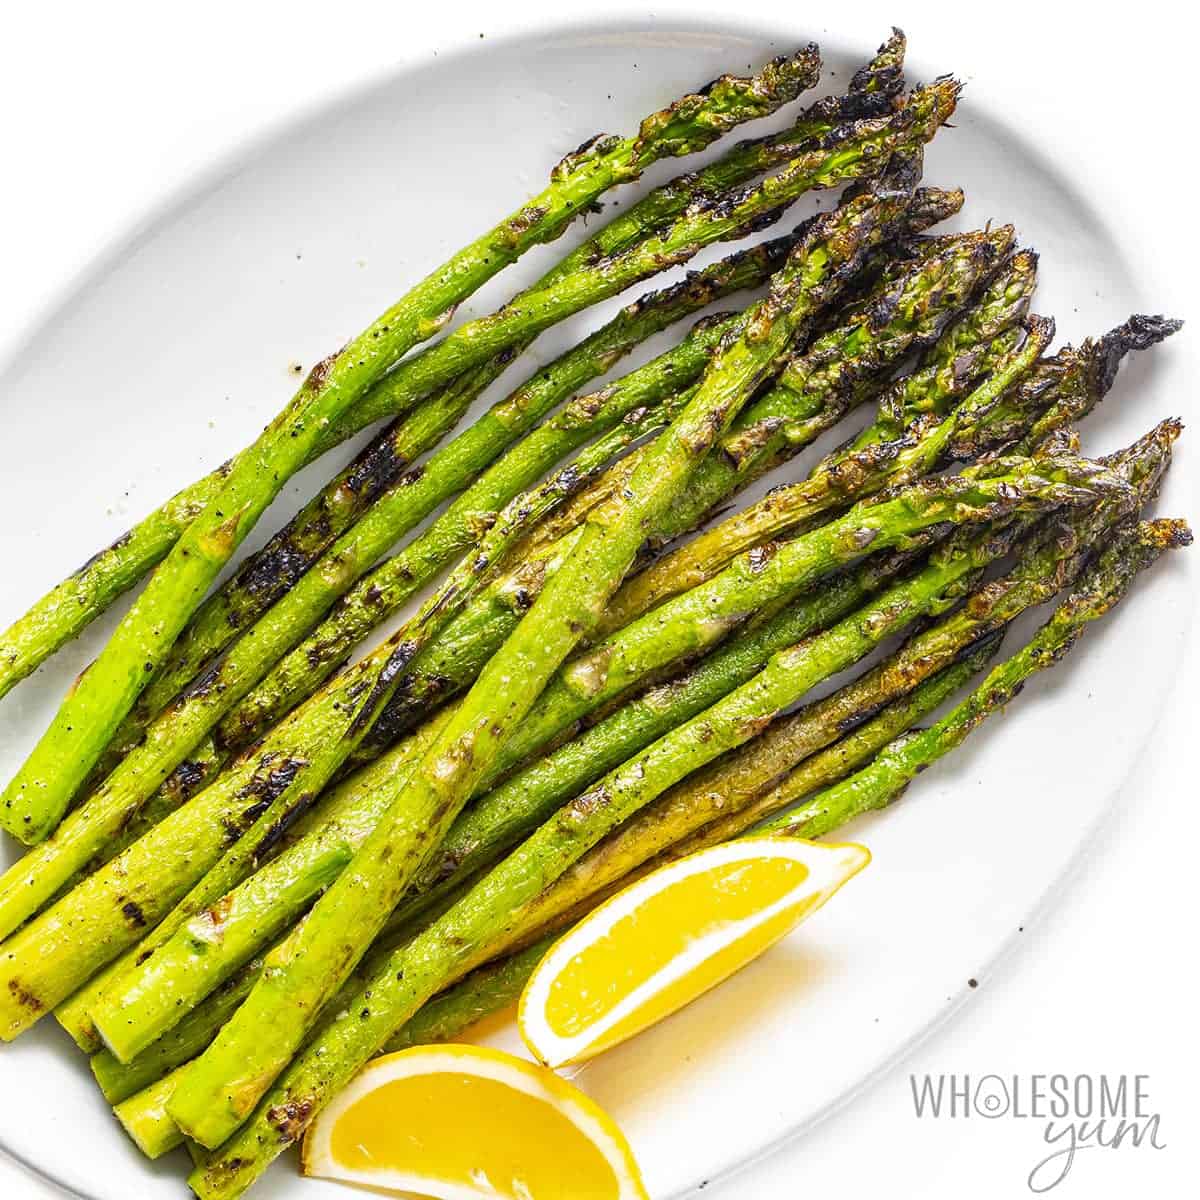 Grilled asparagus on a plate.